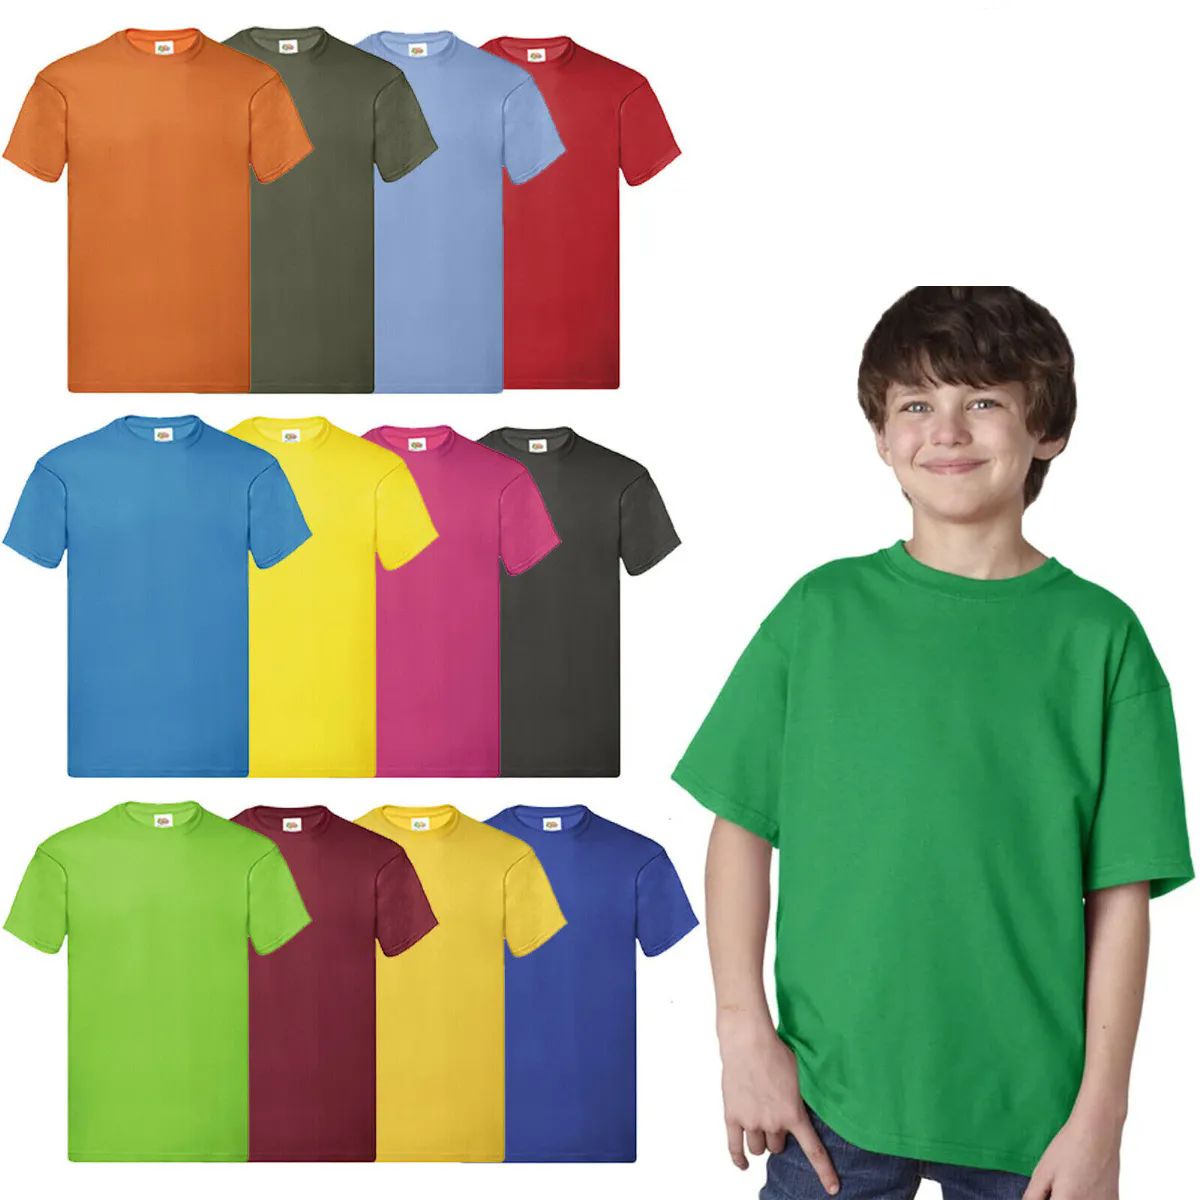 144 Pieces of Billion Hats Kids Youth Cotton Assorted Colors T Shirts Size L